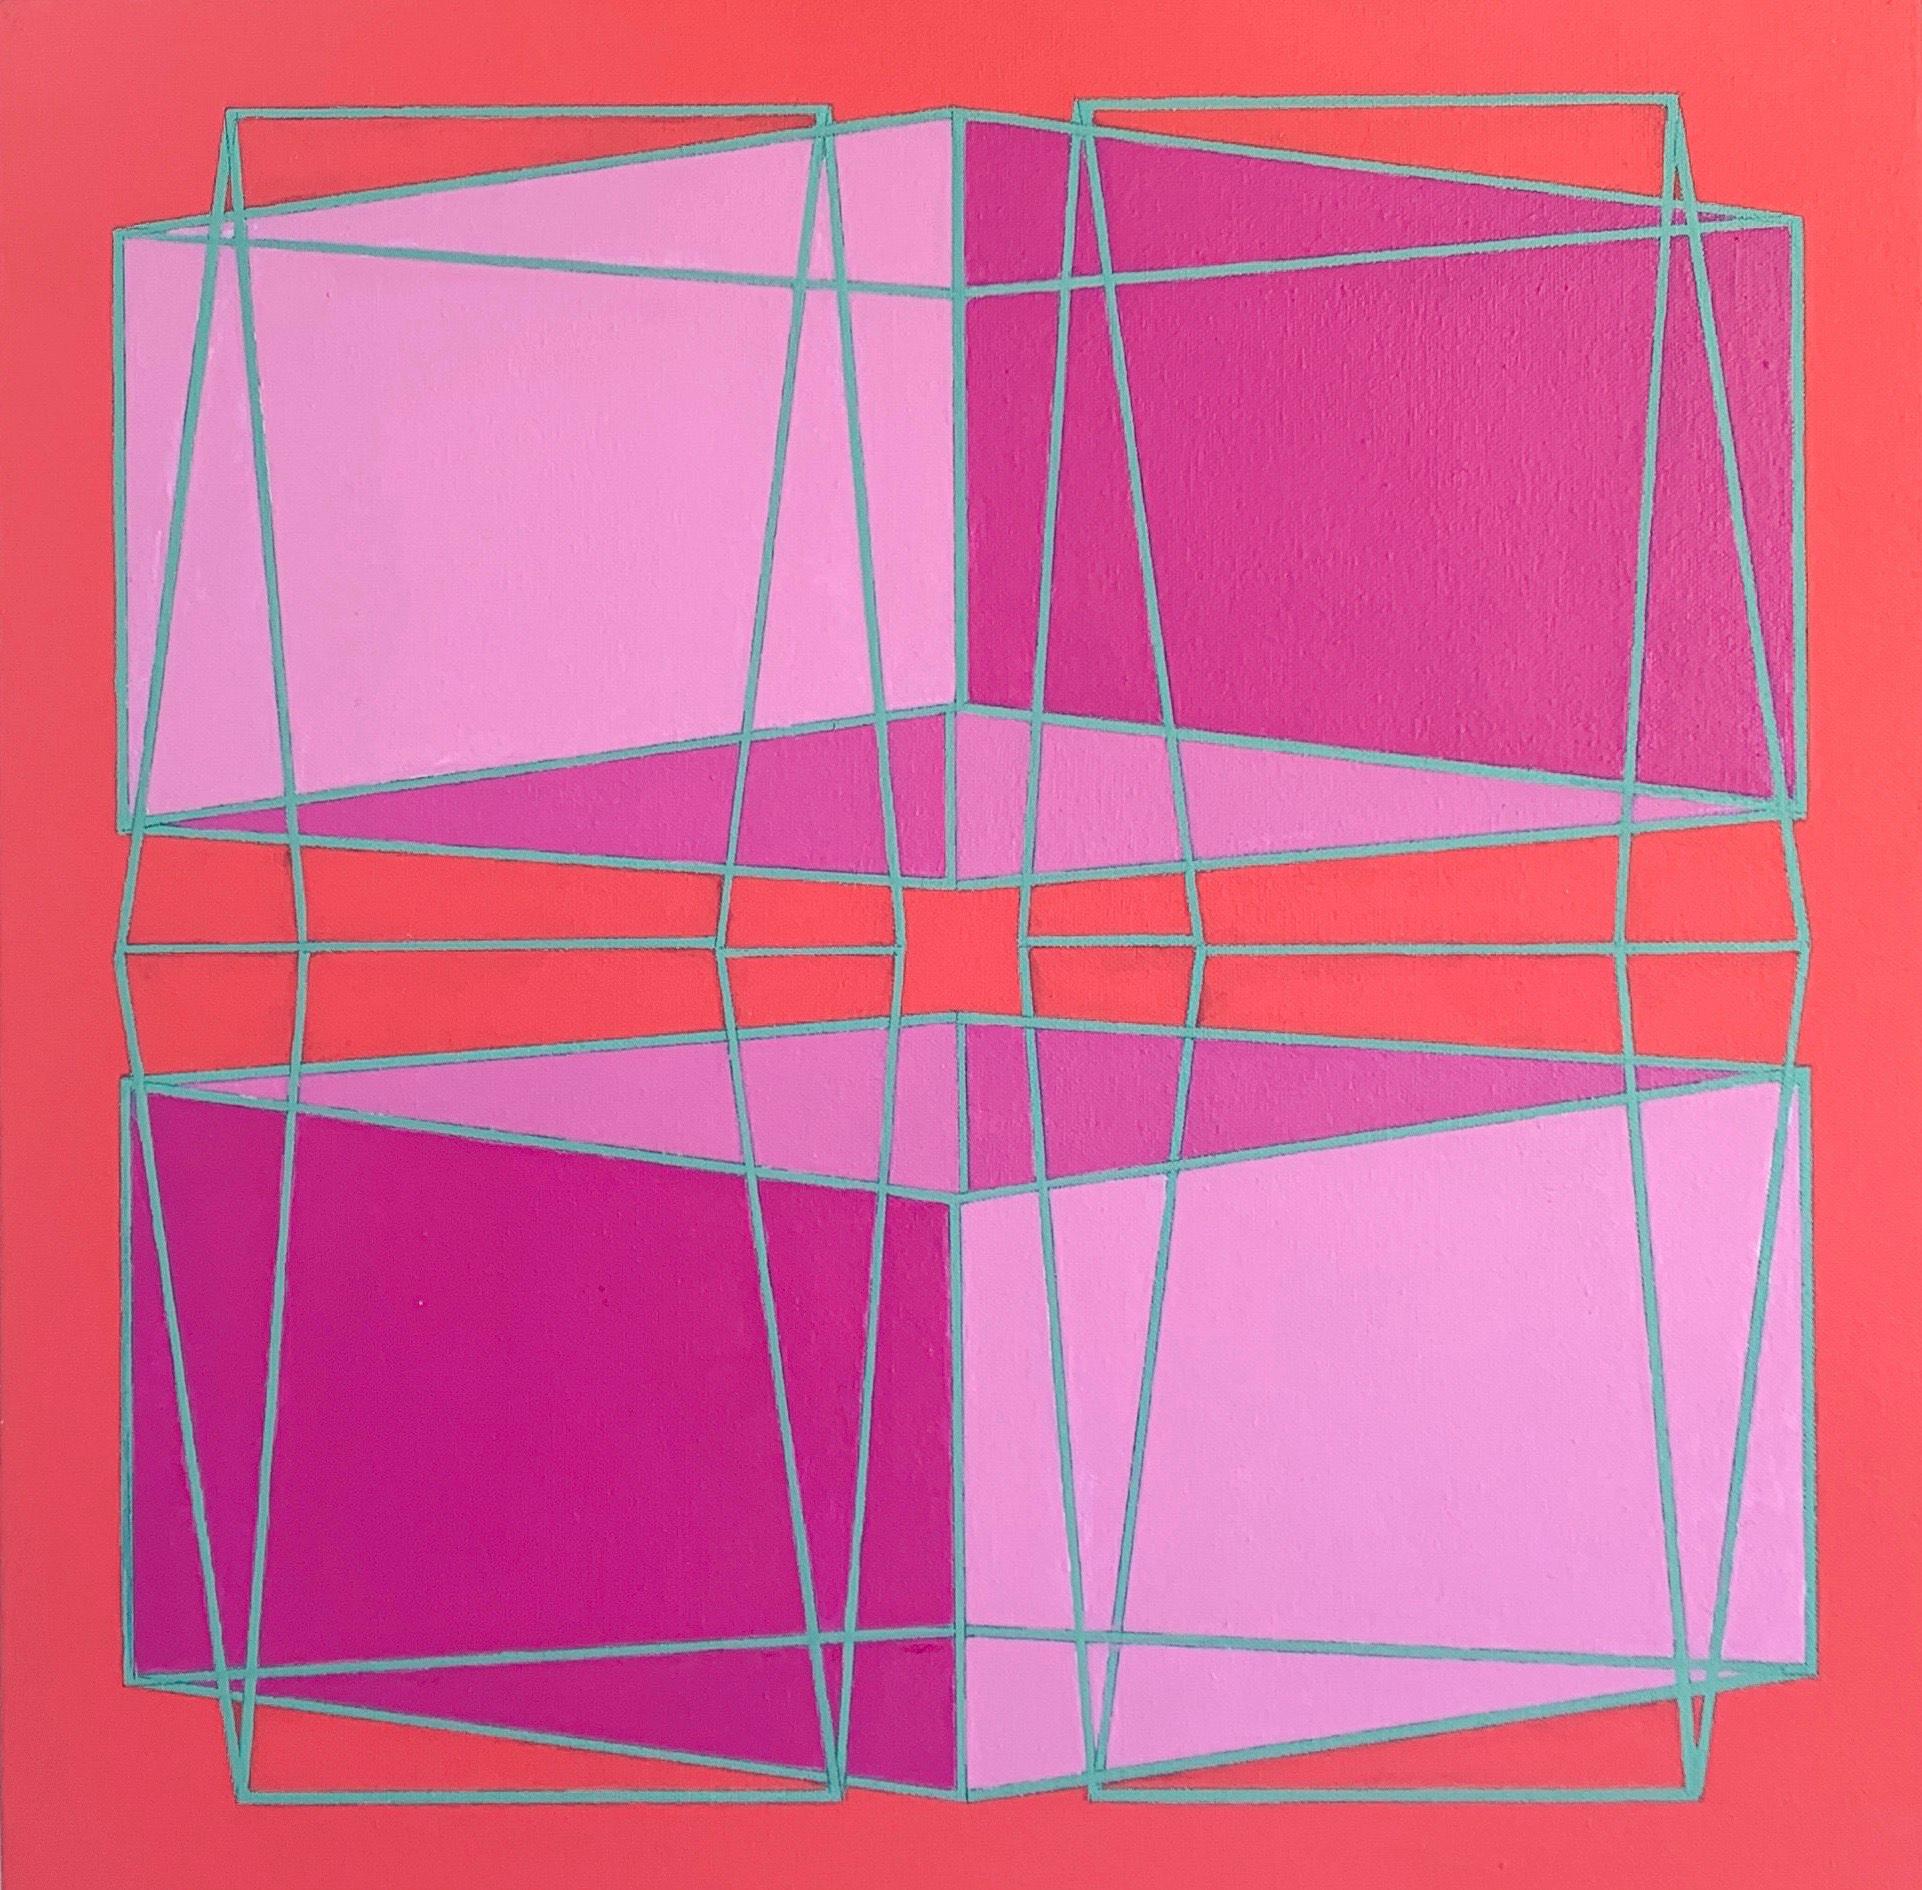 Benjamin Weaver Abstract Painting - Intersecting Cubes #9: geometric abstract Op Art painting, pink & gray on orange